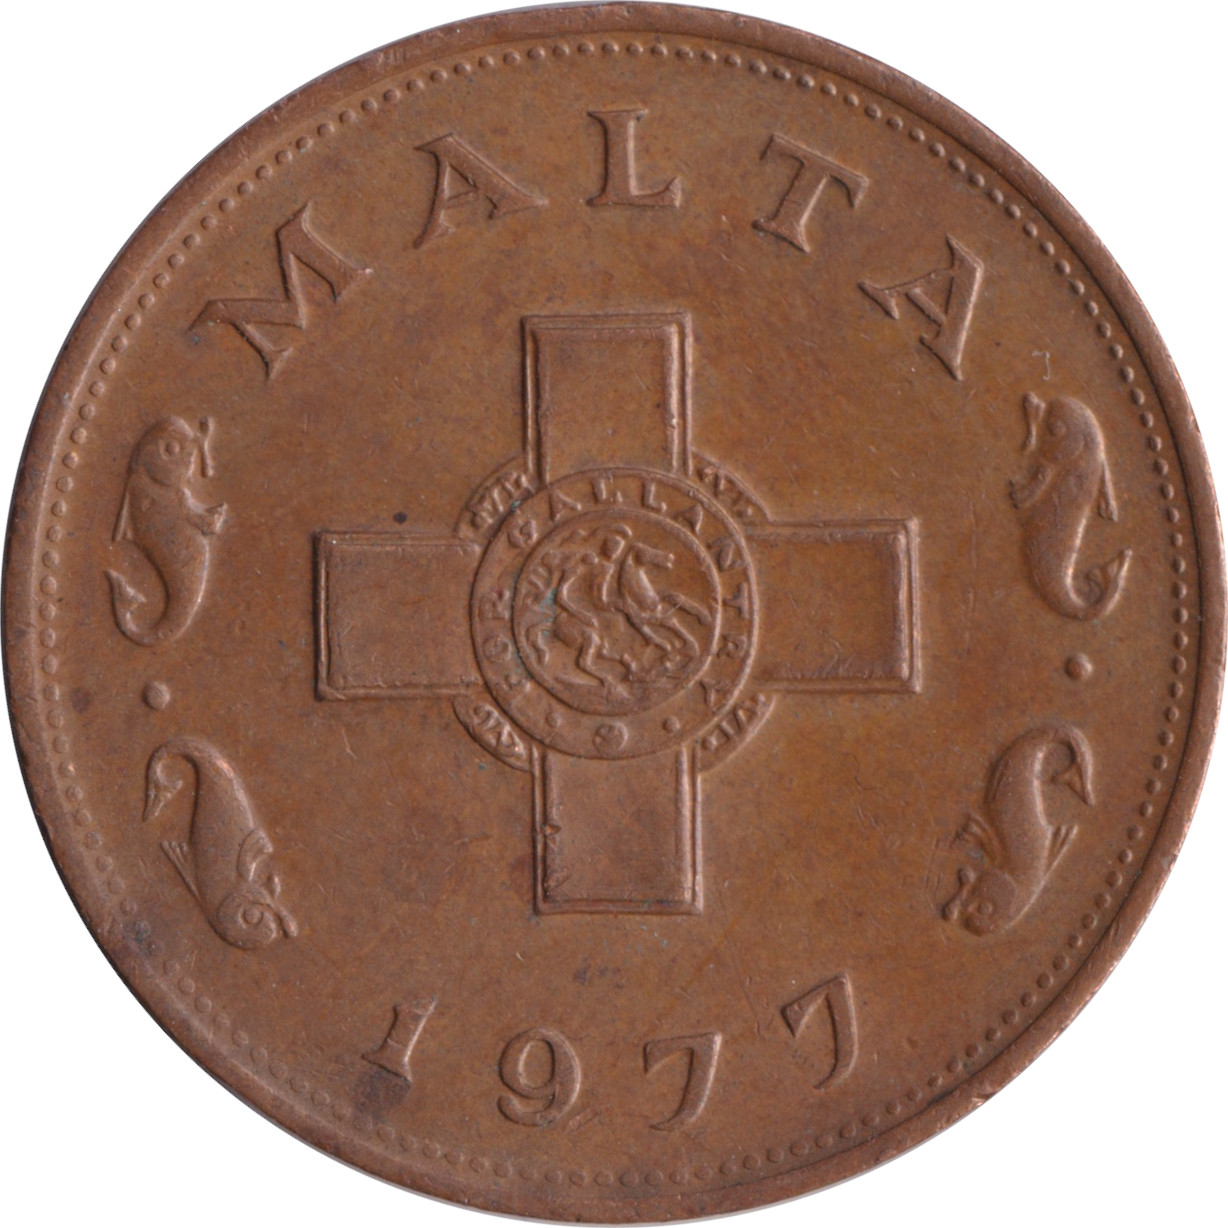 1 cent - Georges Cross - Branches